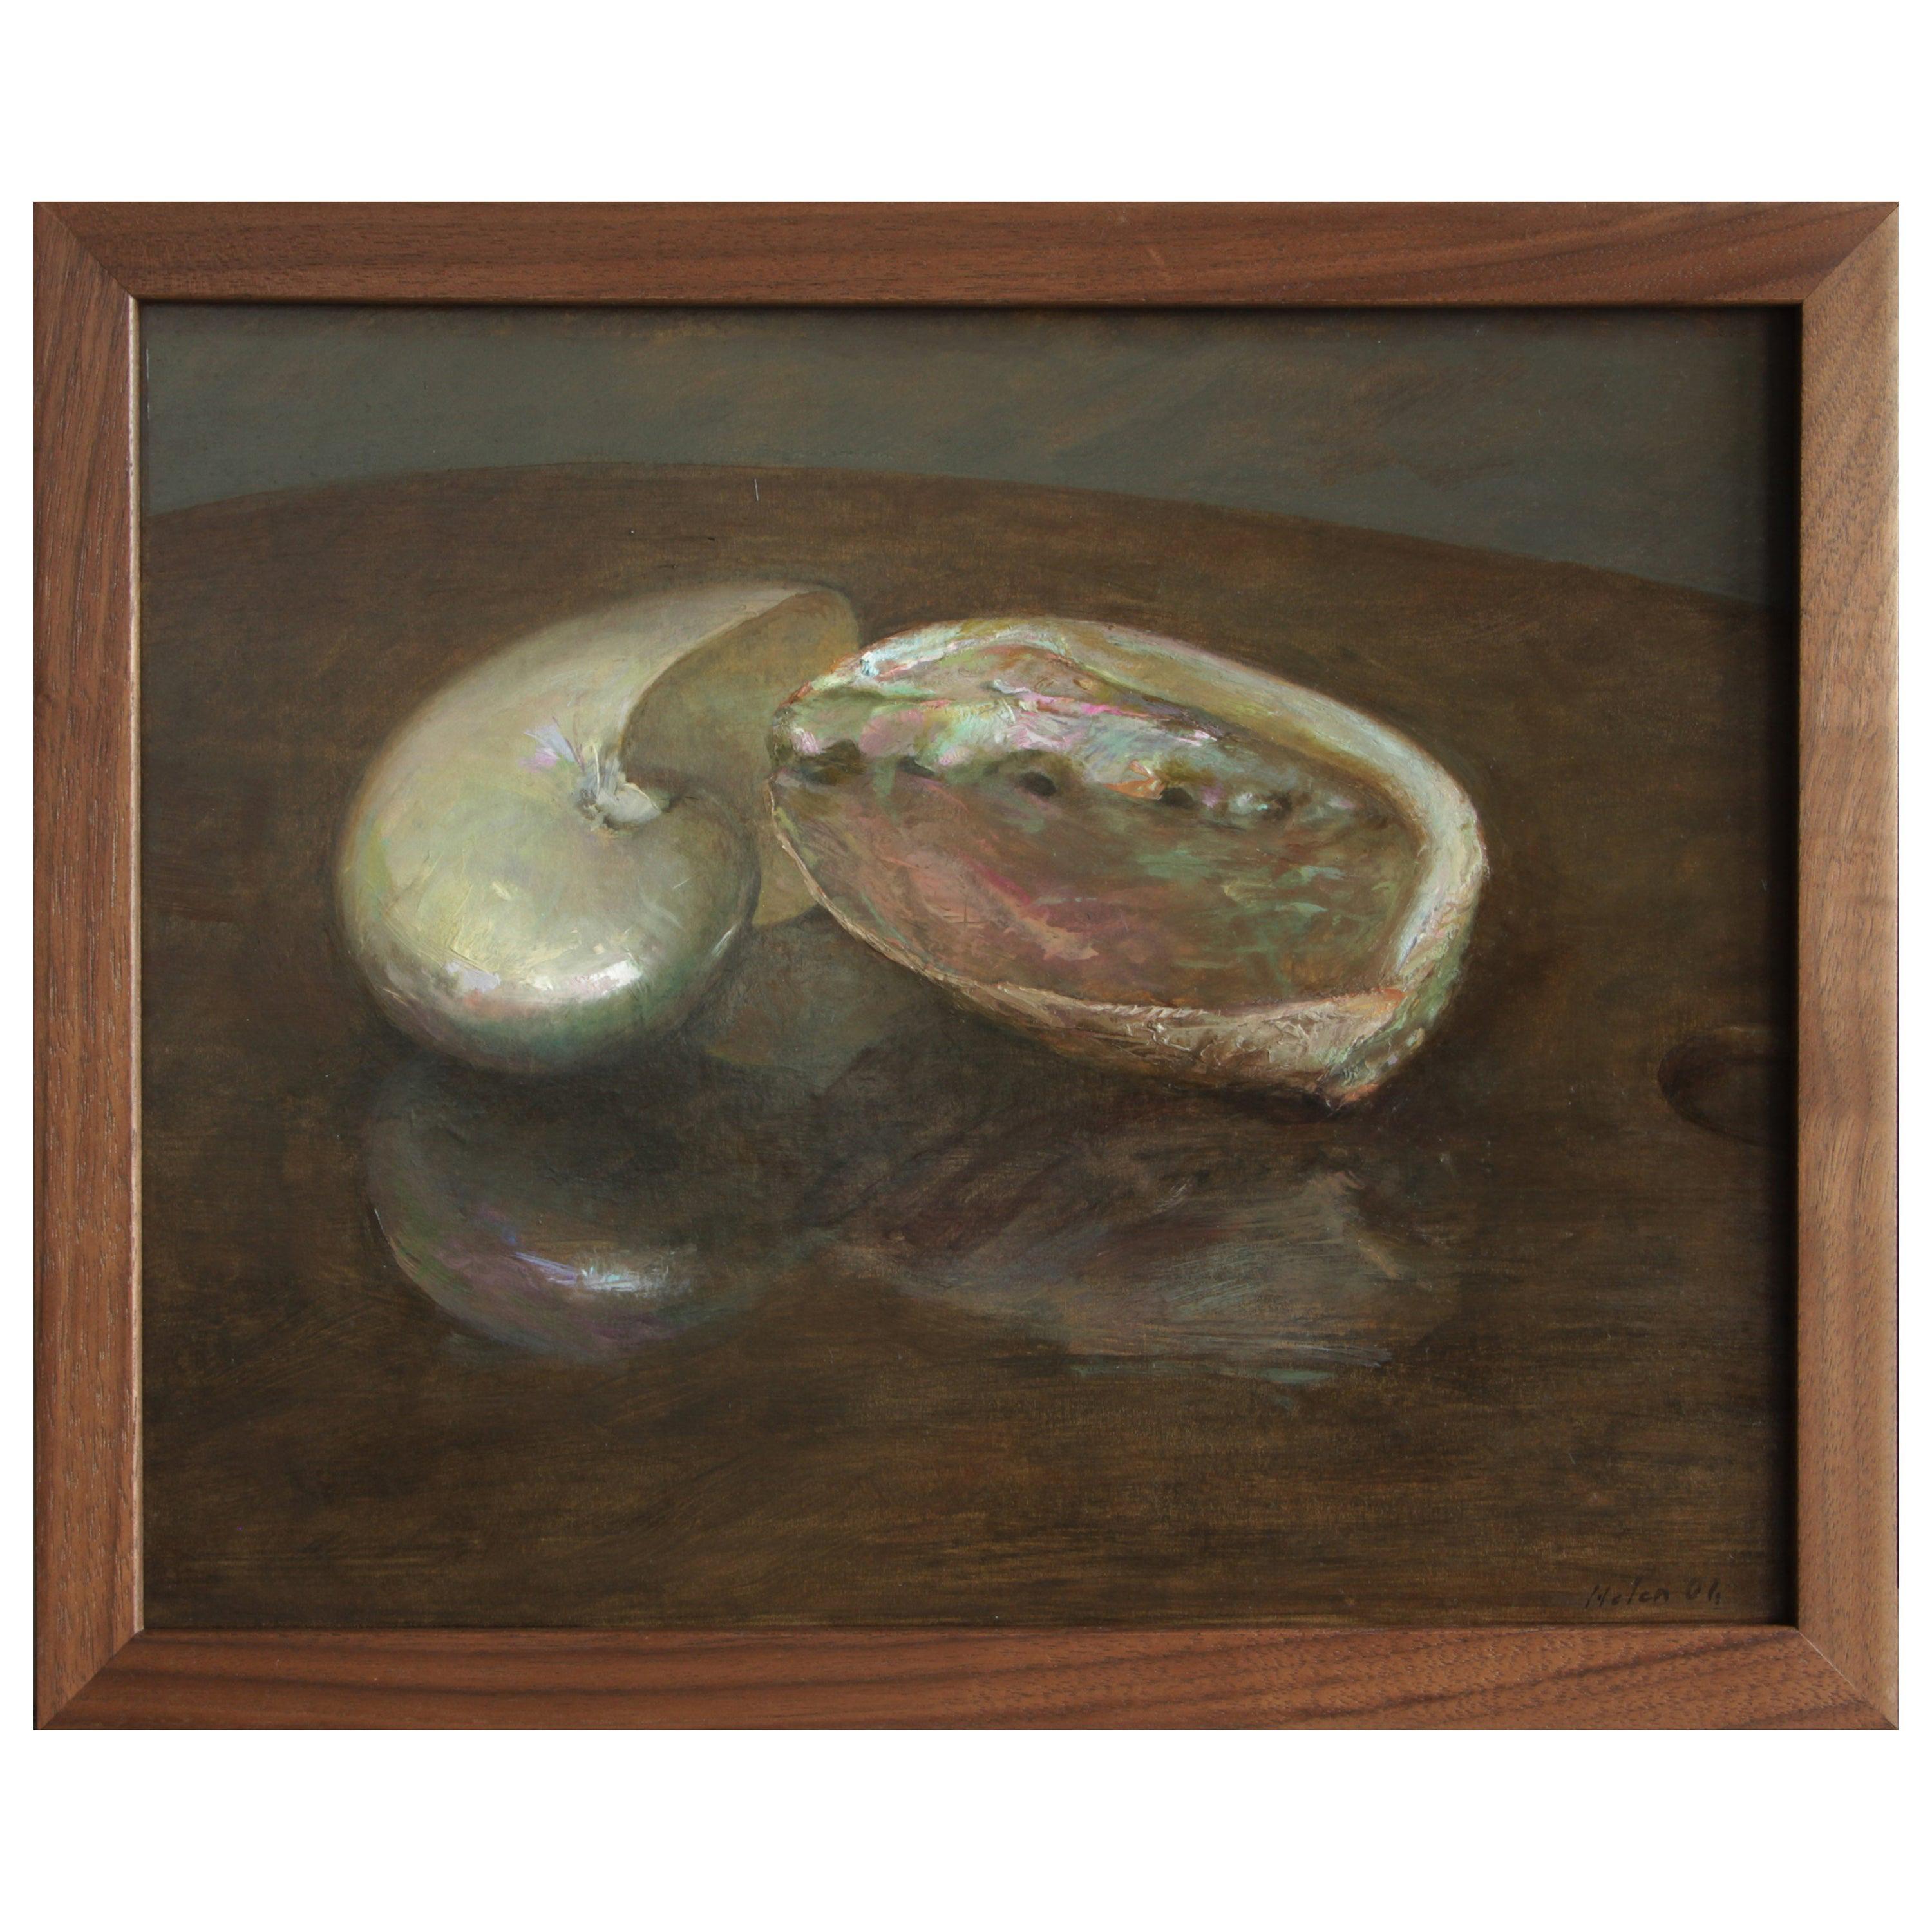 Nautilus and Abalone, Oil on Panel Still Life Painting with Two Sea Shells